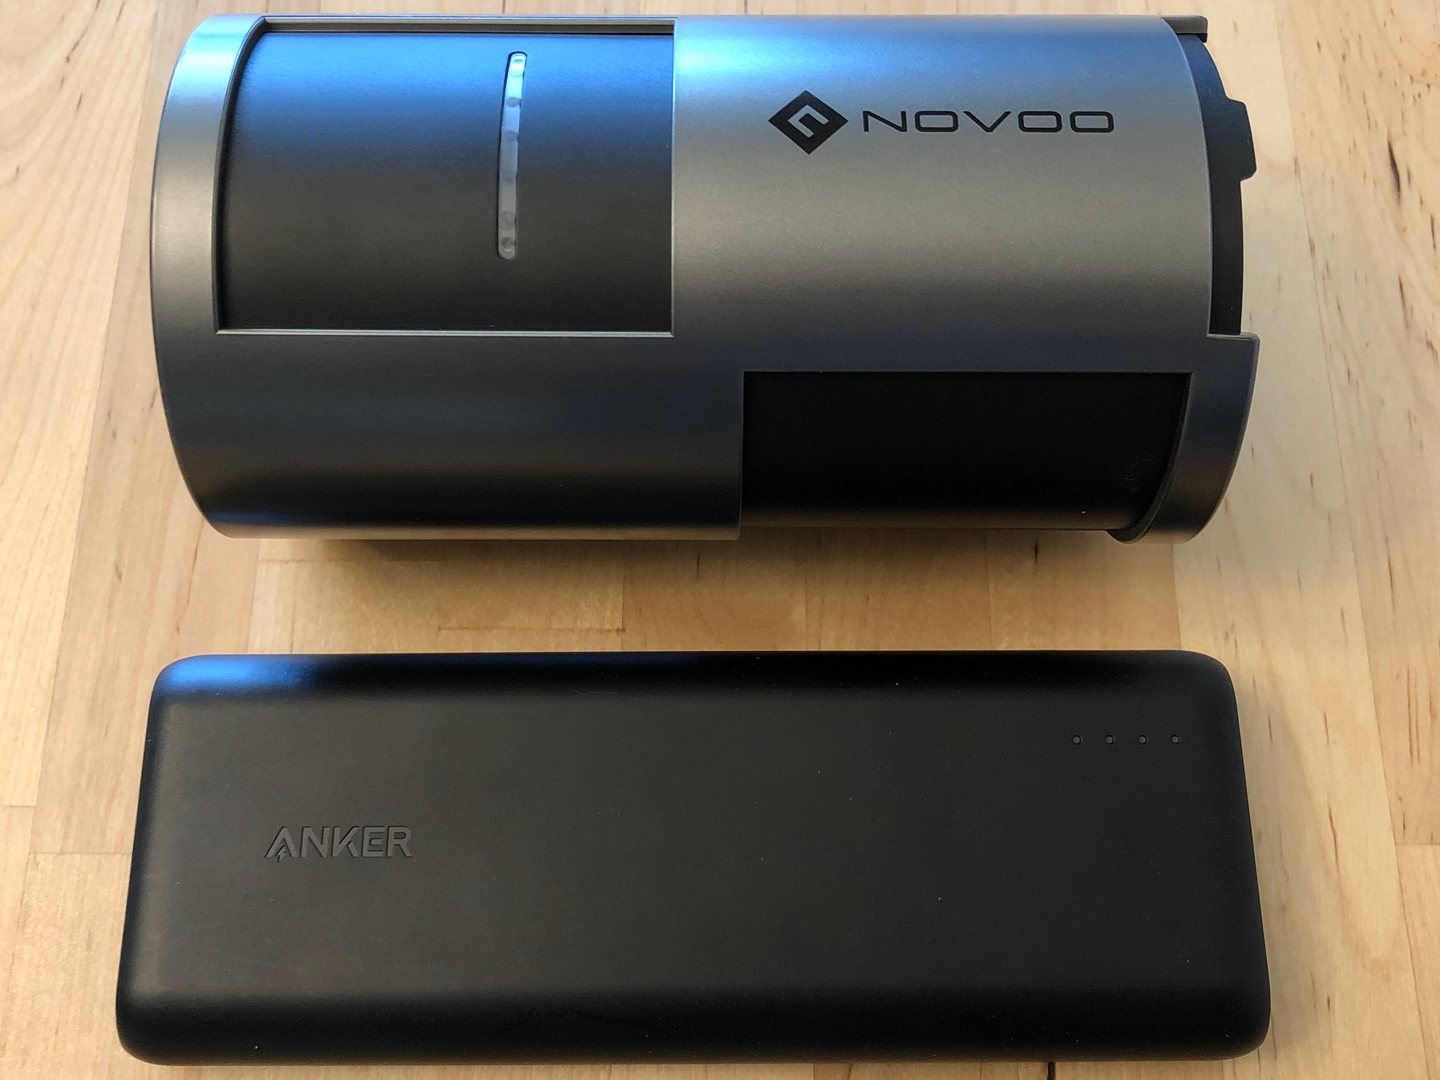 Novoo 85W AC Portable Power Station Review - Switch Chargers